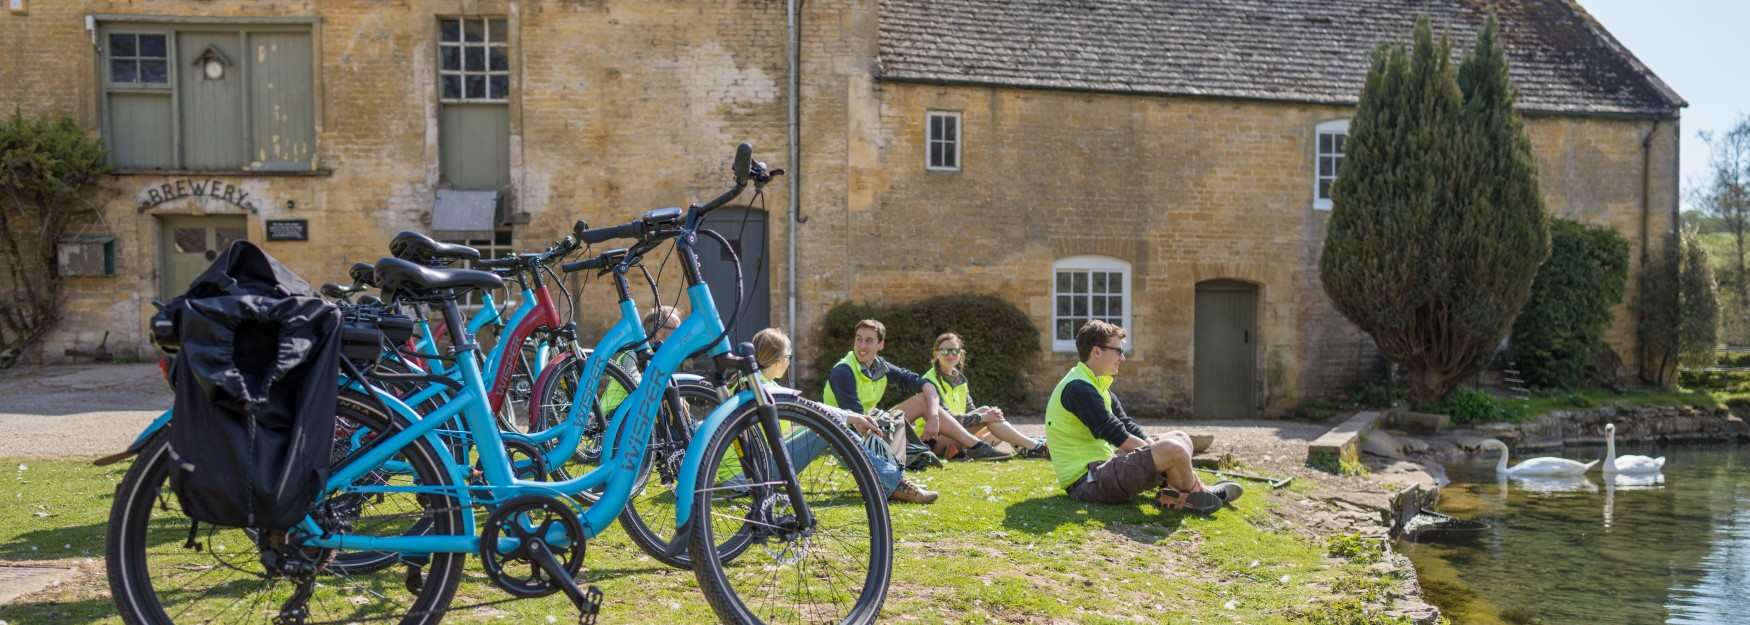 Group of cyclists resting by a river